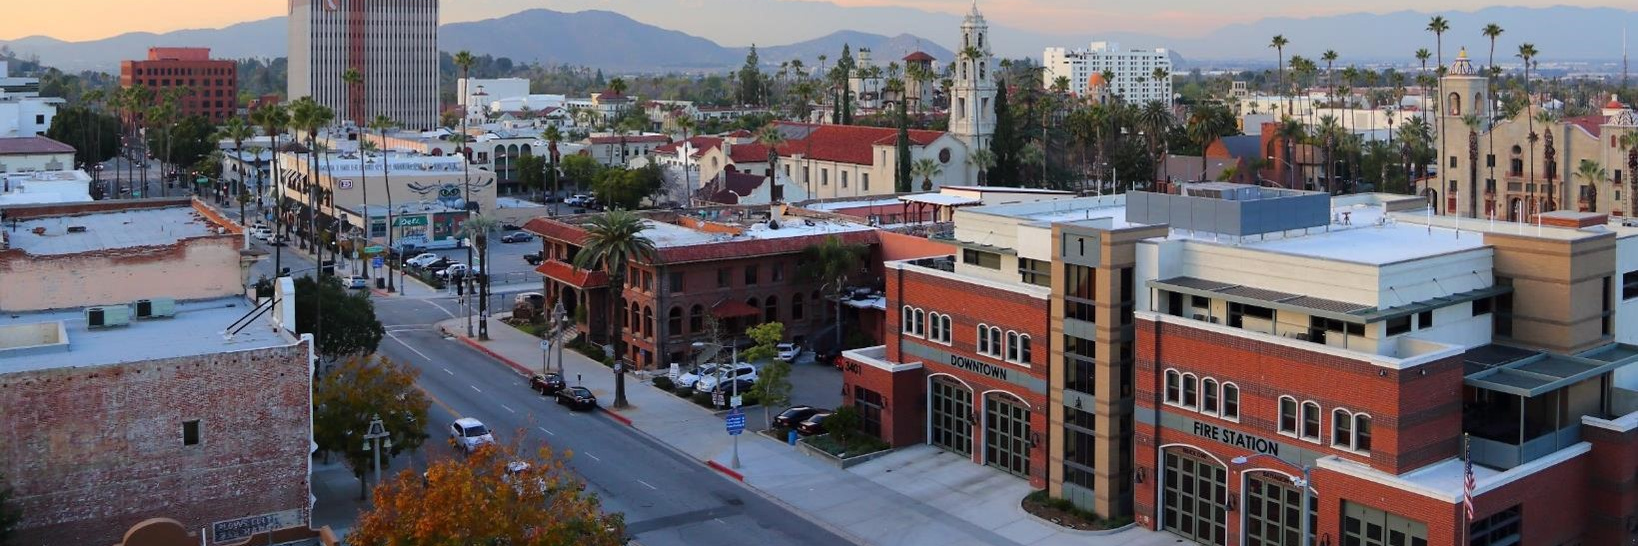 Riverside, California - Thriving in the Inland Empire | Business View